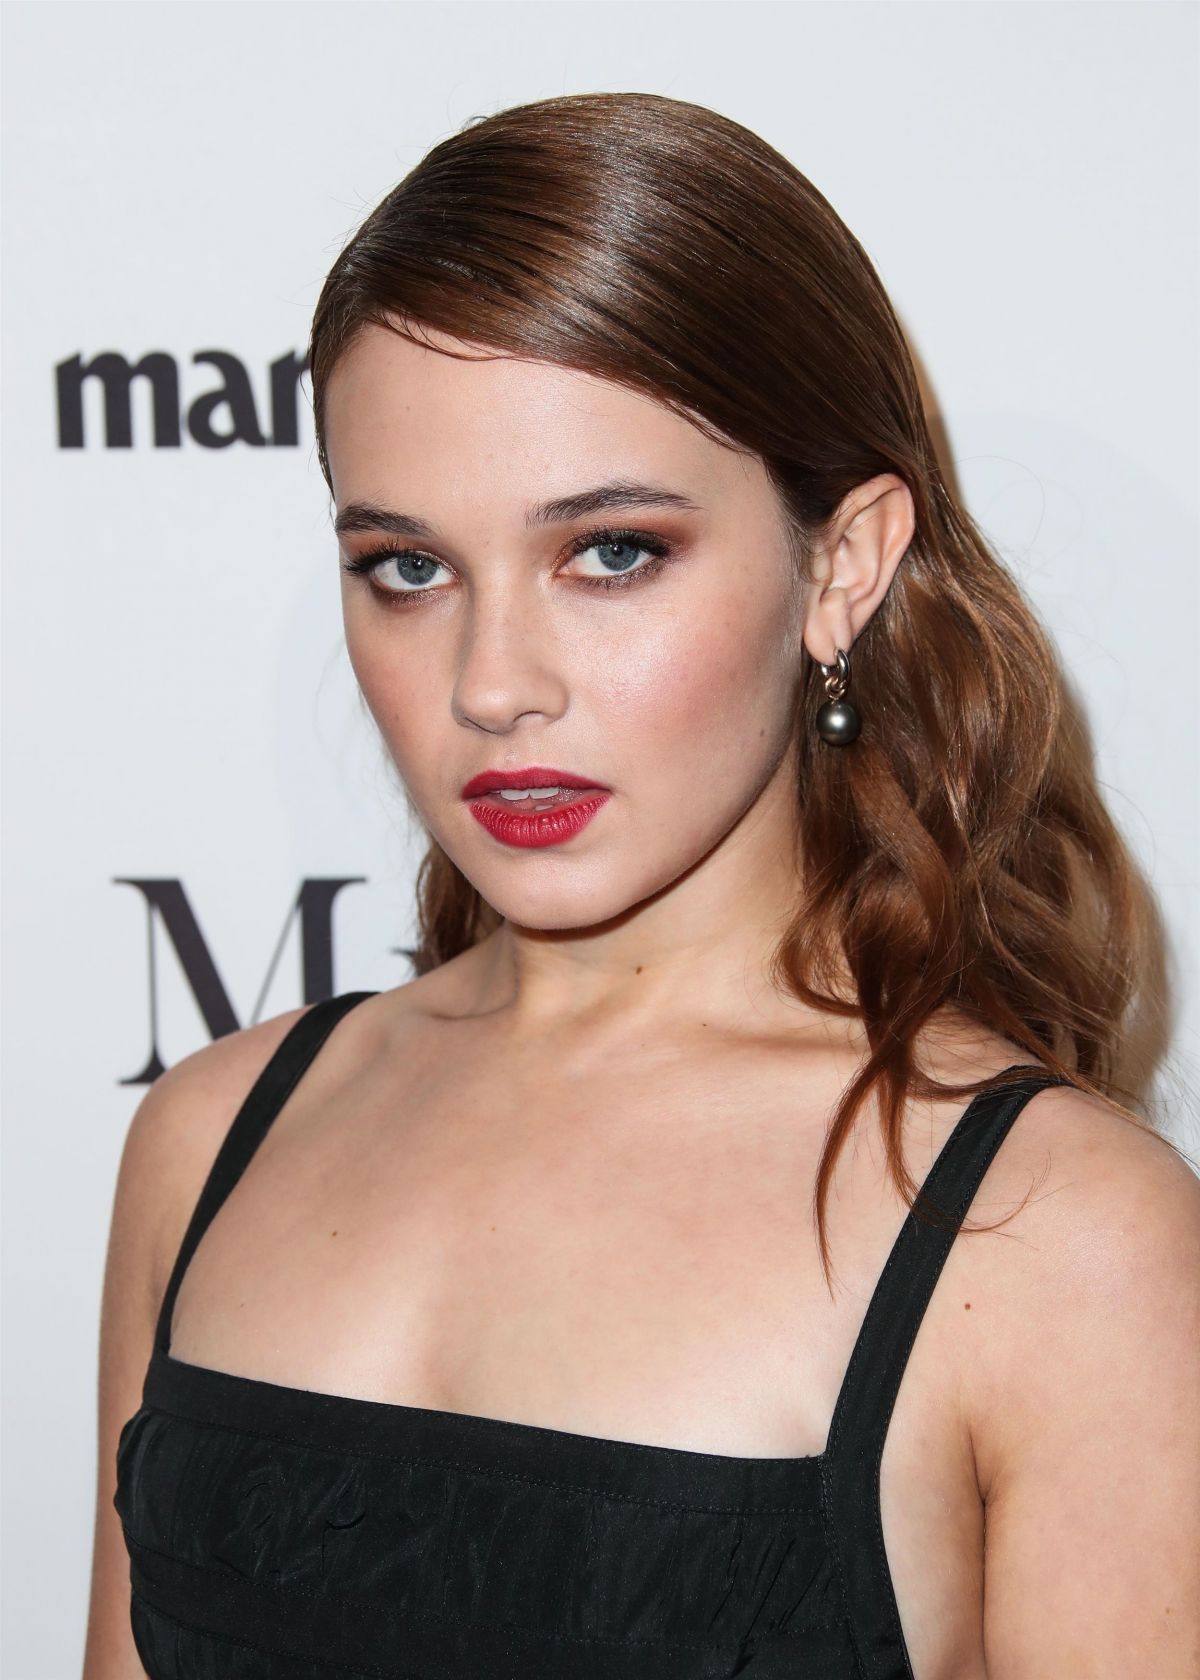 How tall is Cailee Spaeny?